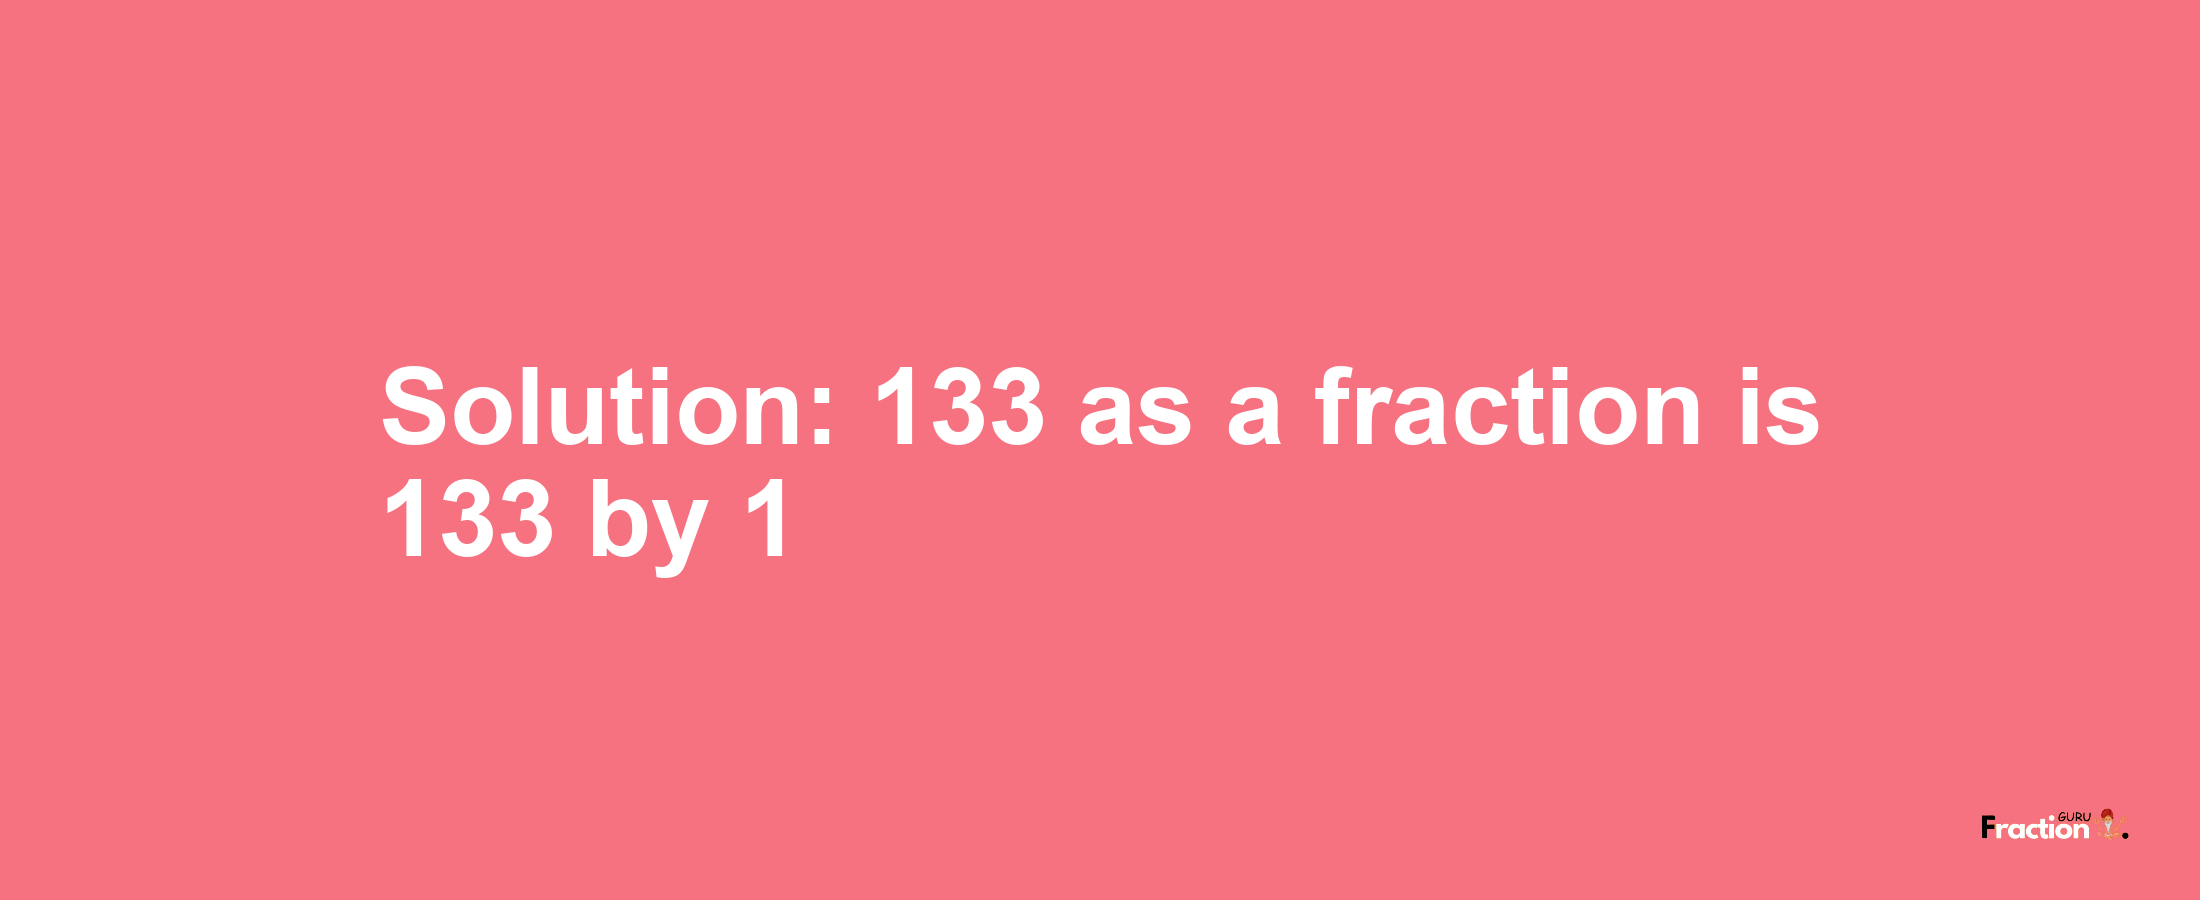 Solution:133 as a fraction is 133/1